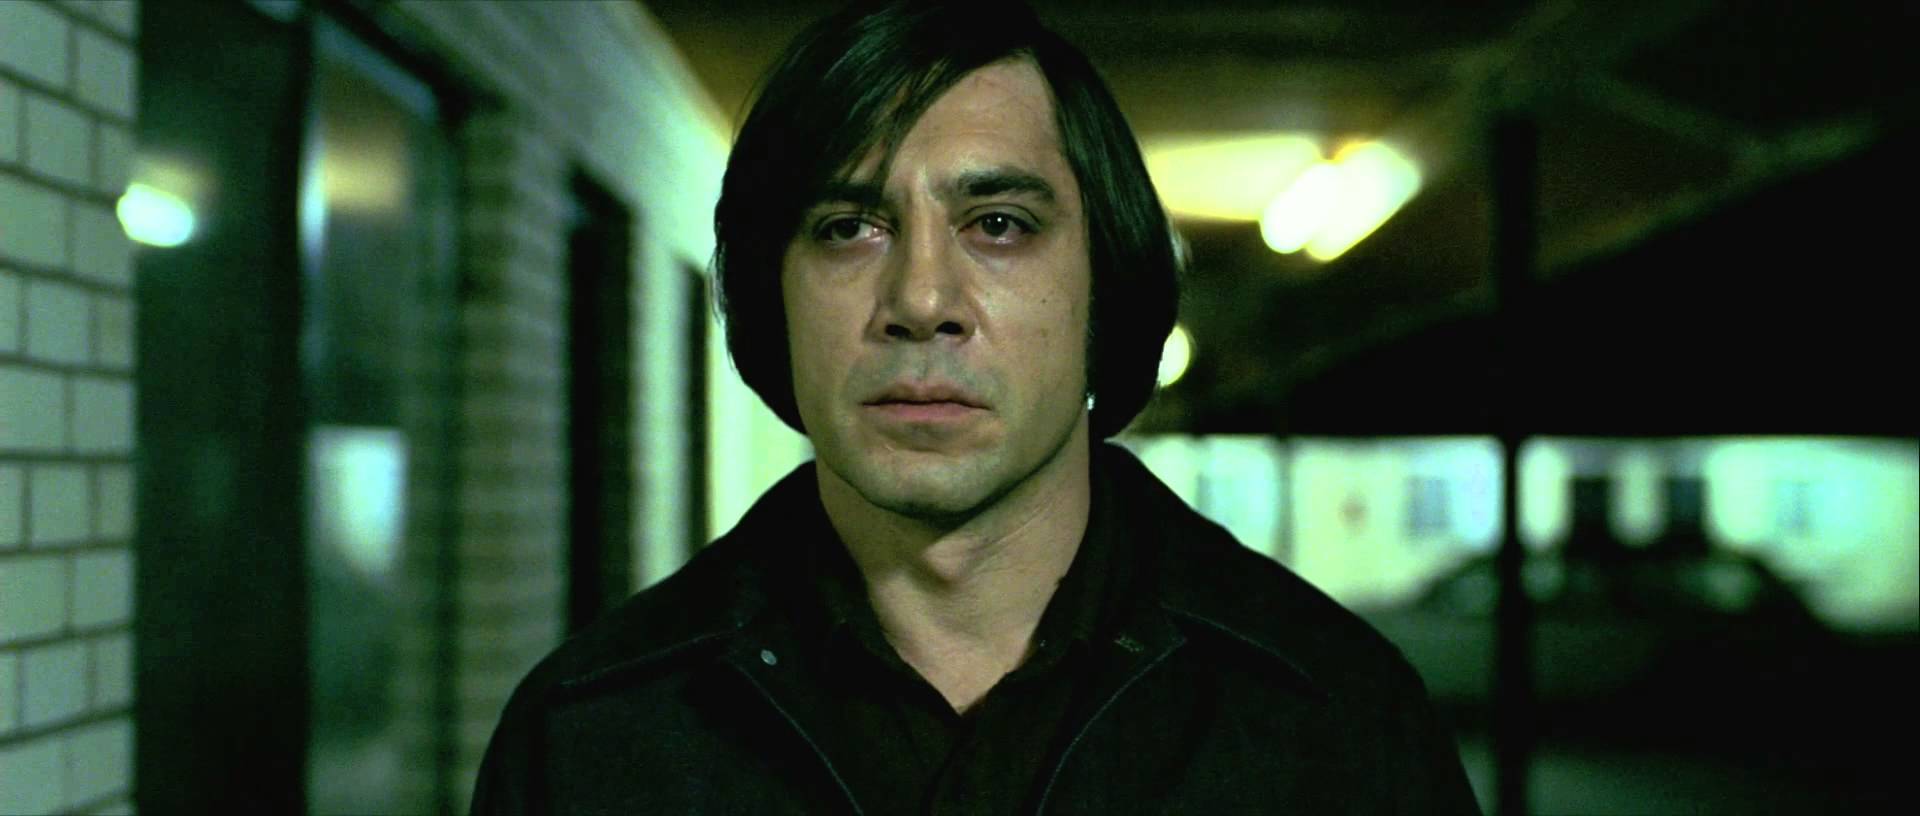 No Country for Old Men (2007) by Coen Brothers